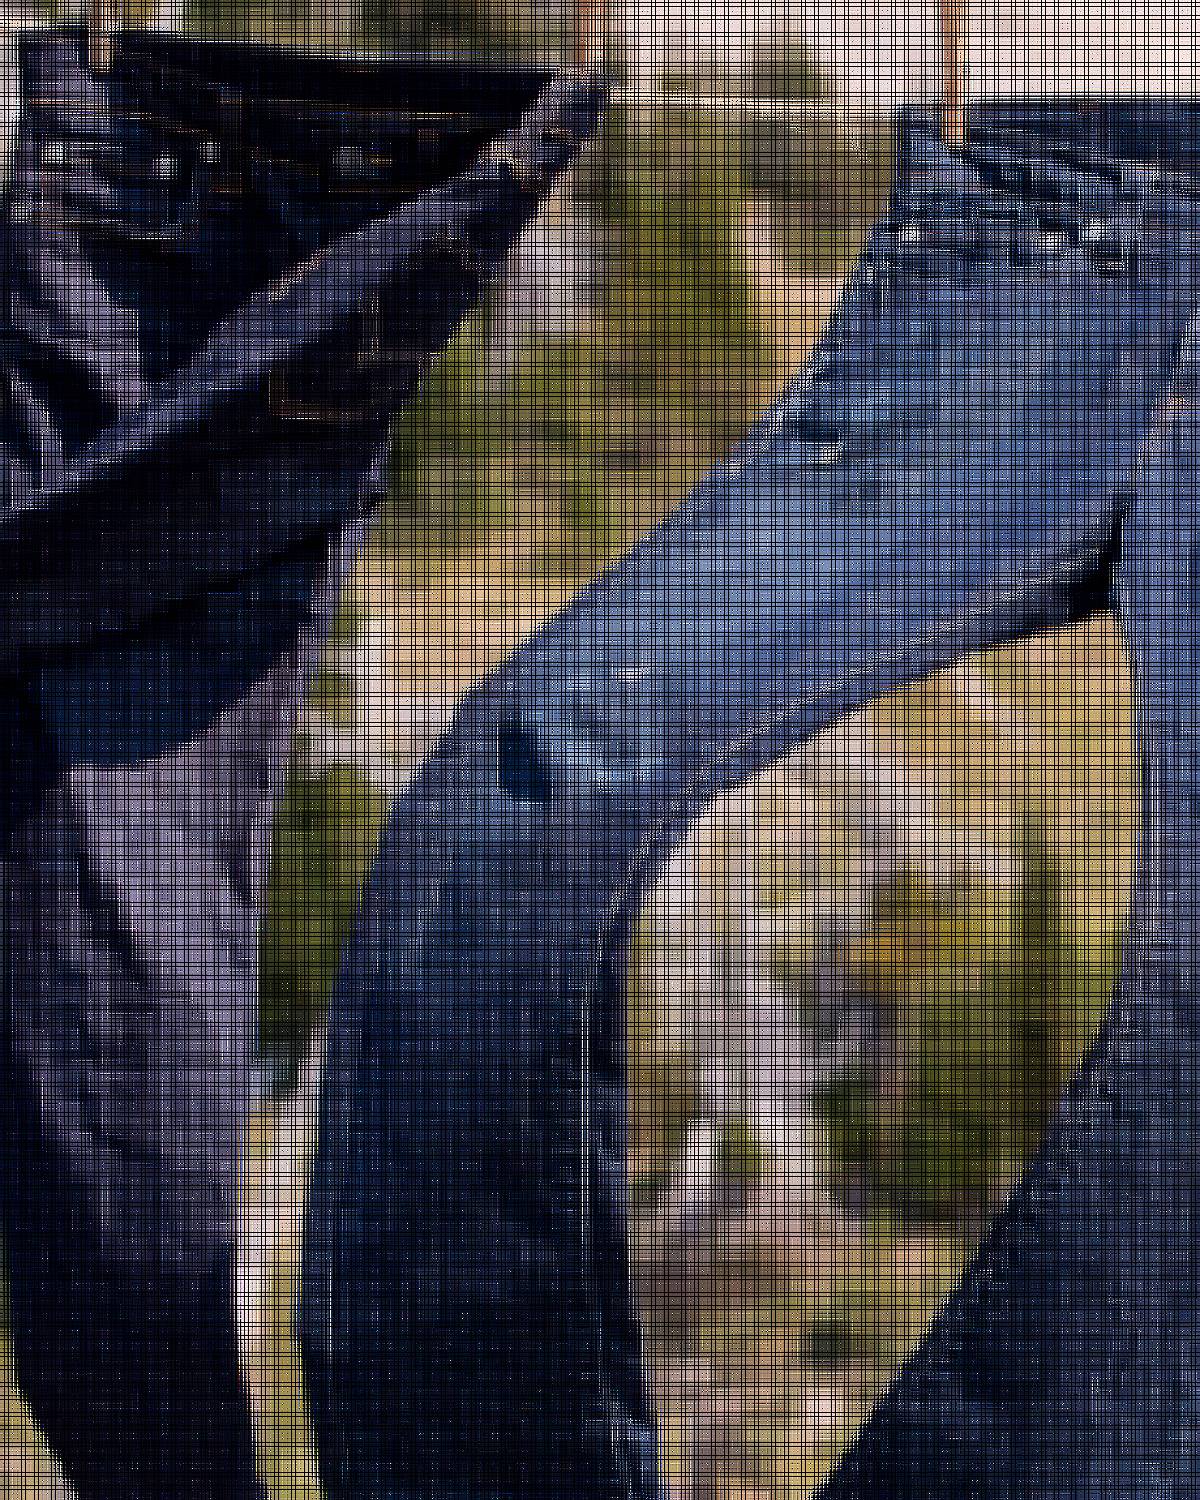 Jeans hang drying.